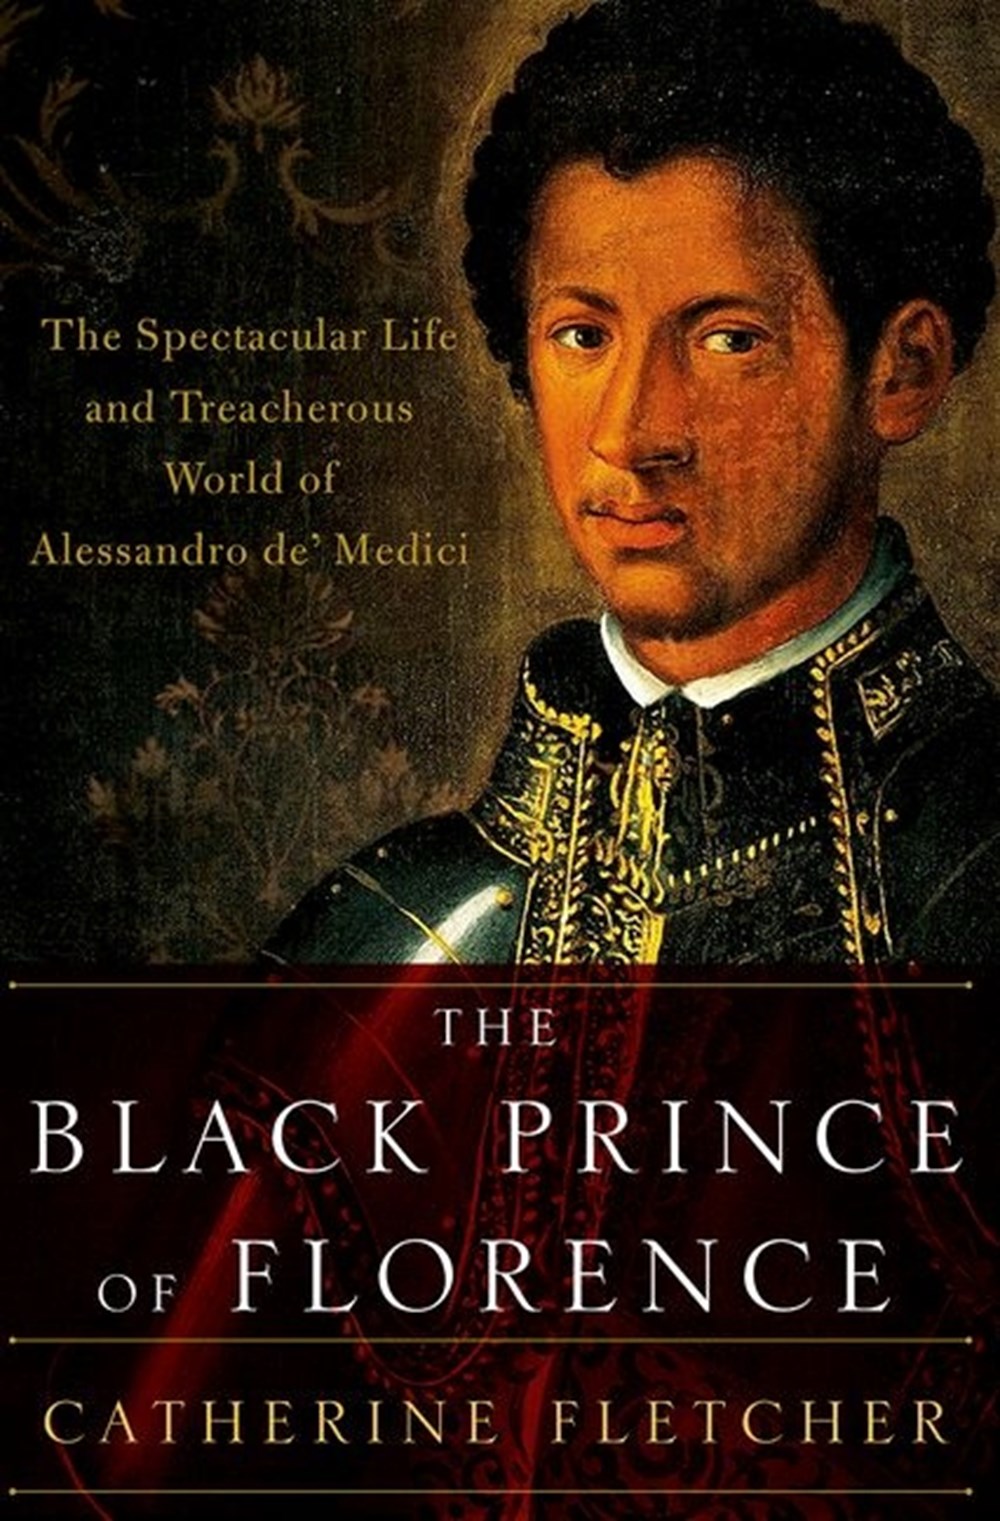 Black Prince of Florence The Spectacular Life and Treacherous World of Alessandro De' Medici